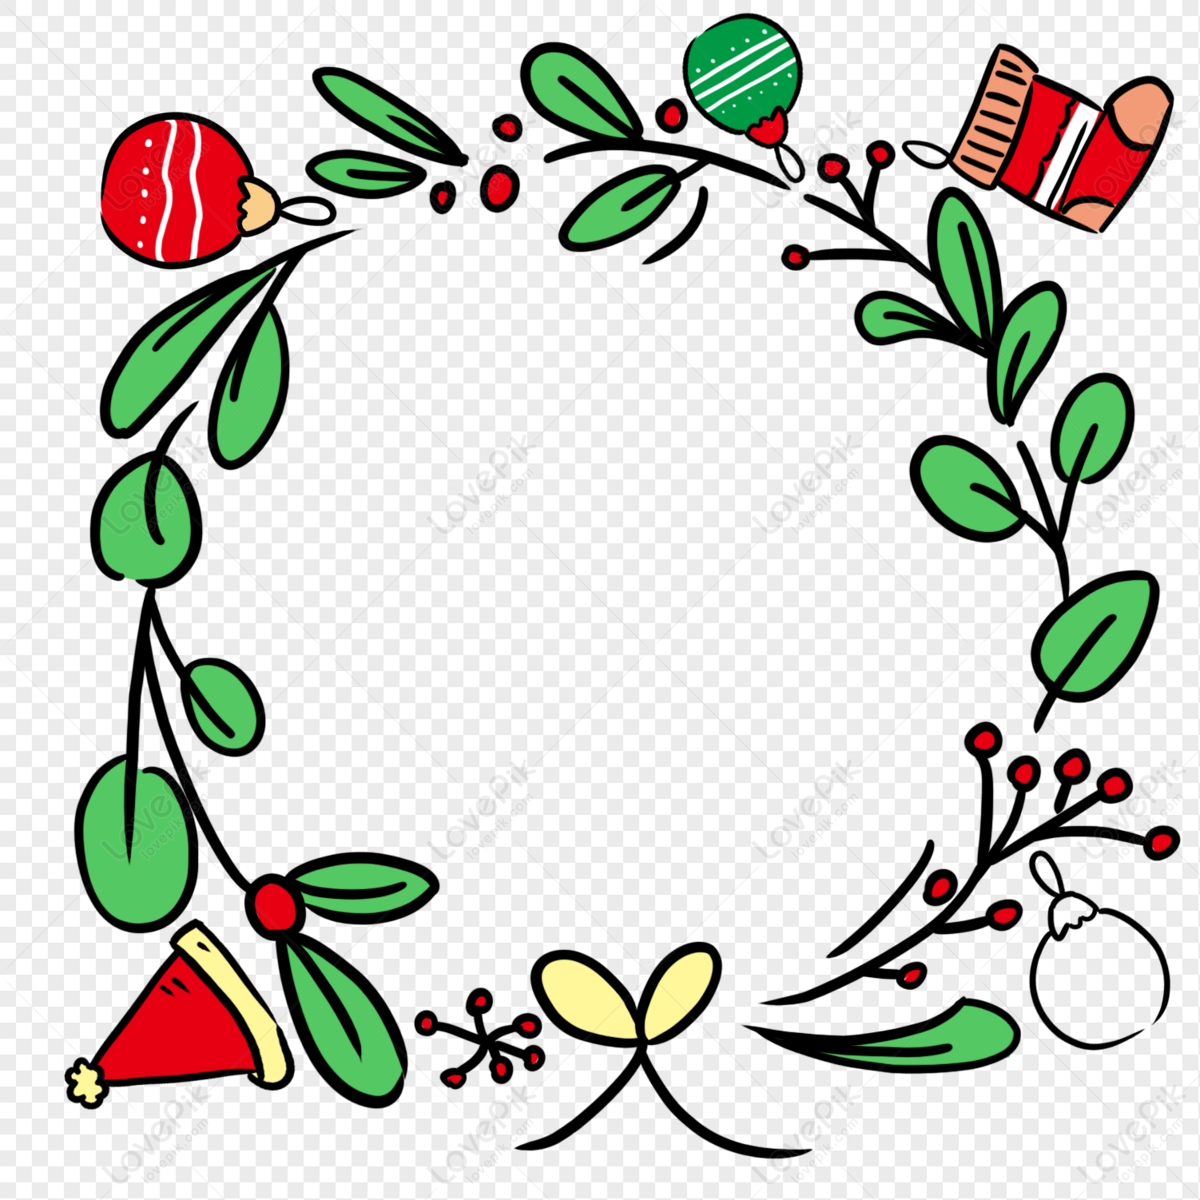 Christmas Wreath Border PNG Transparent Background And Clipart Image For  Free Download - Lovepik | 401652720